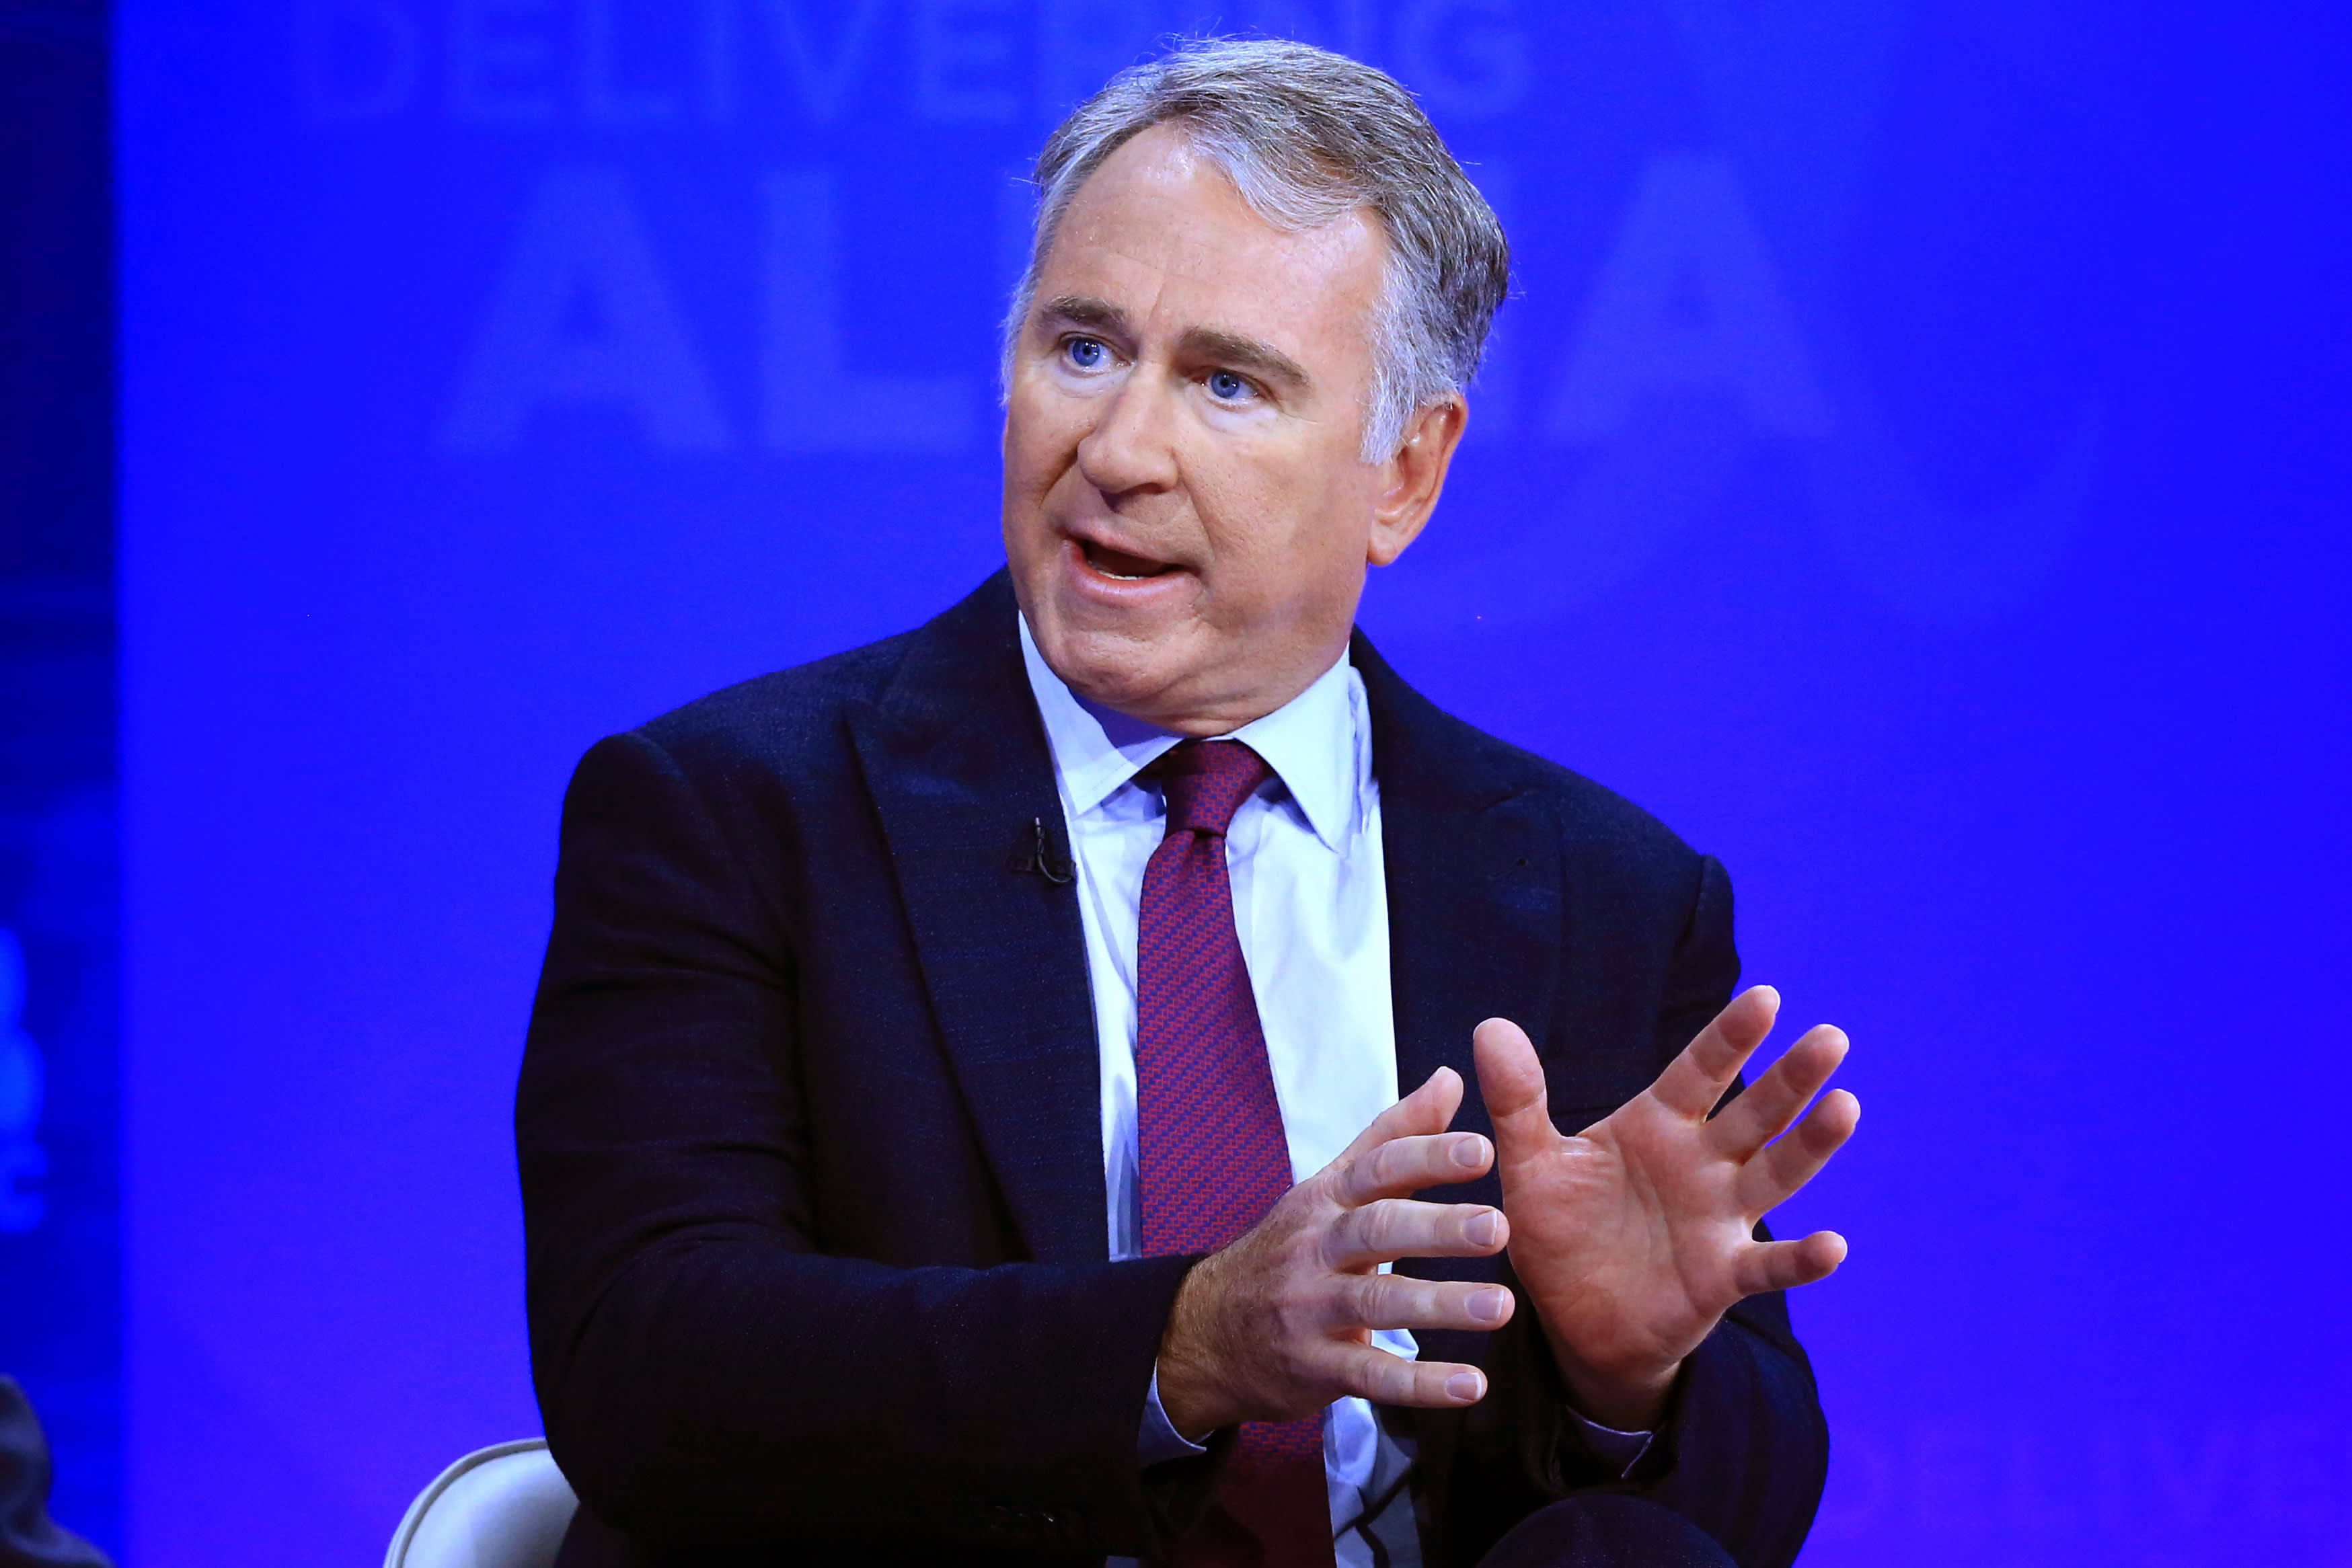 Ken Griffin's hedge fund Citadel acquires a 5% stake in Western Alliance Bancorp amid banking turmoil